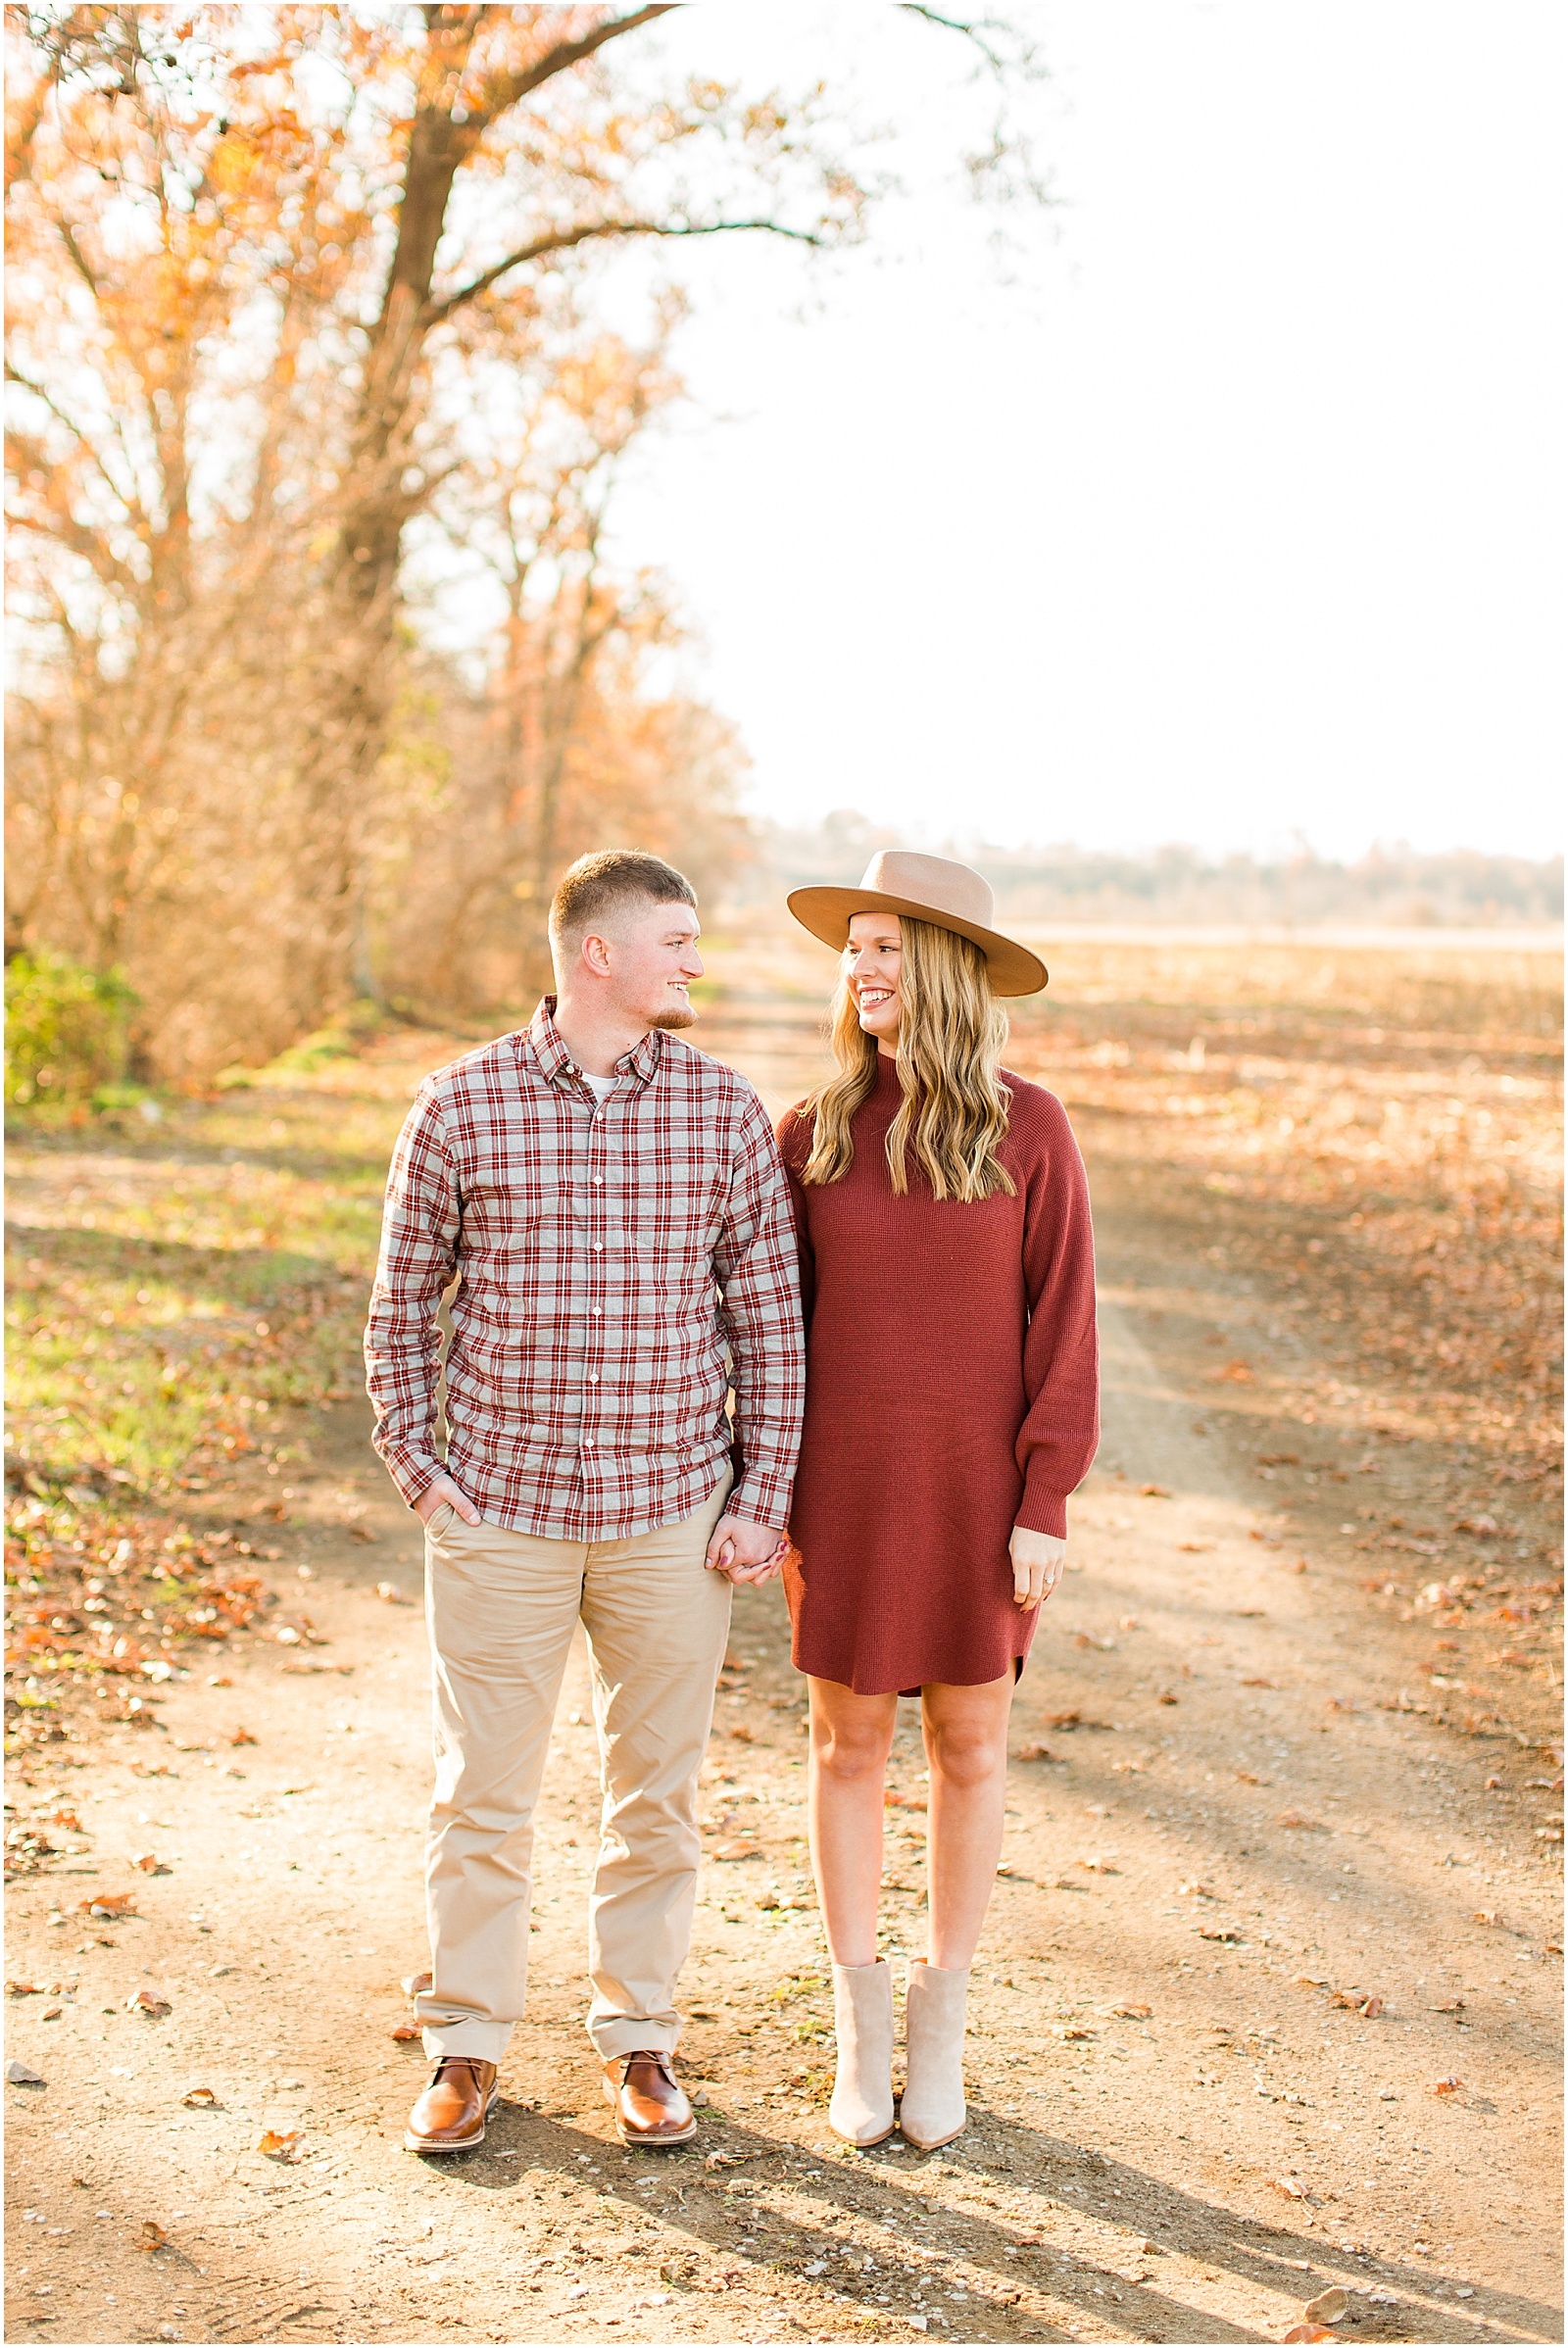 A Fall Southern Indiana Engagement Seesion | Cody and Hannah | Bret and Brandie Photography 001.jpg